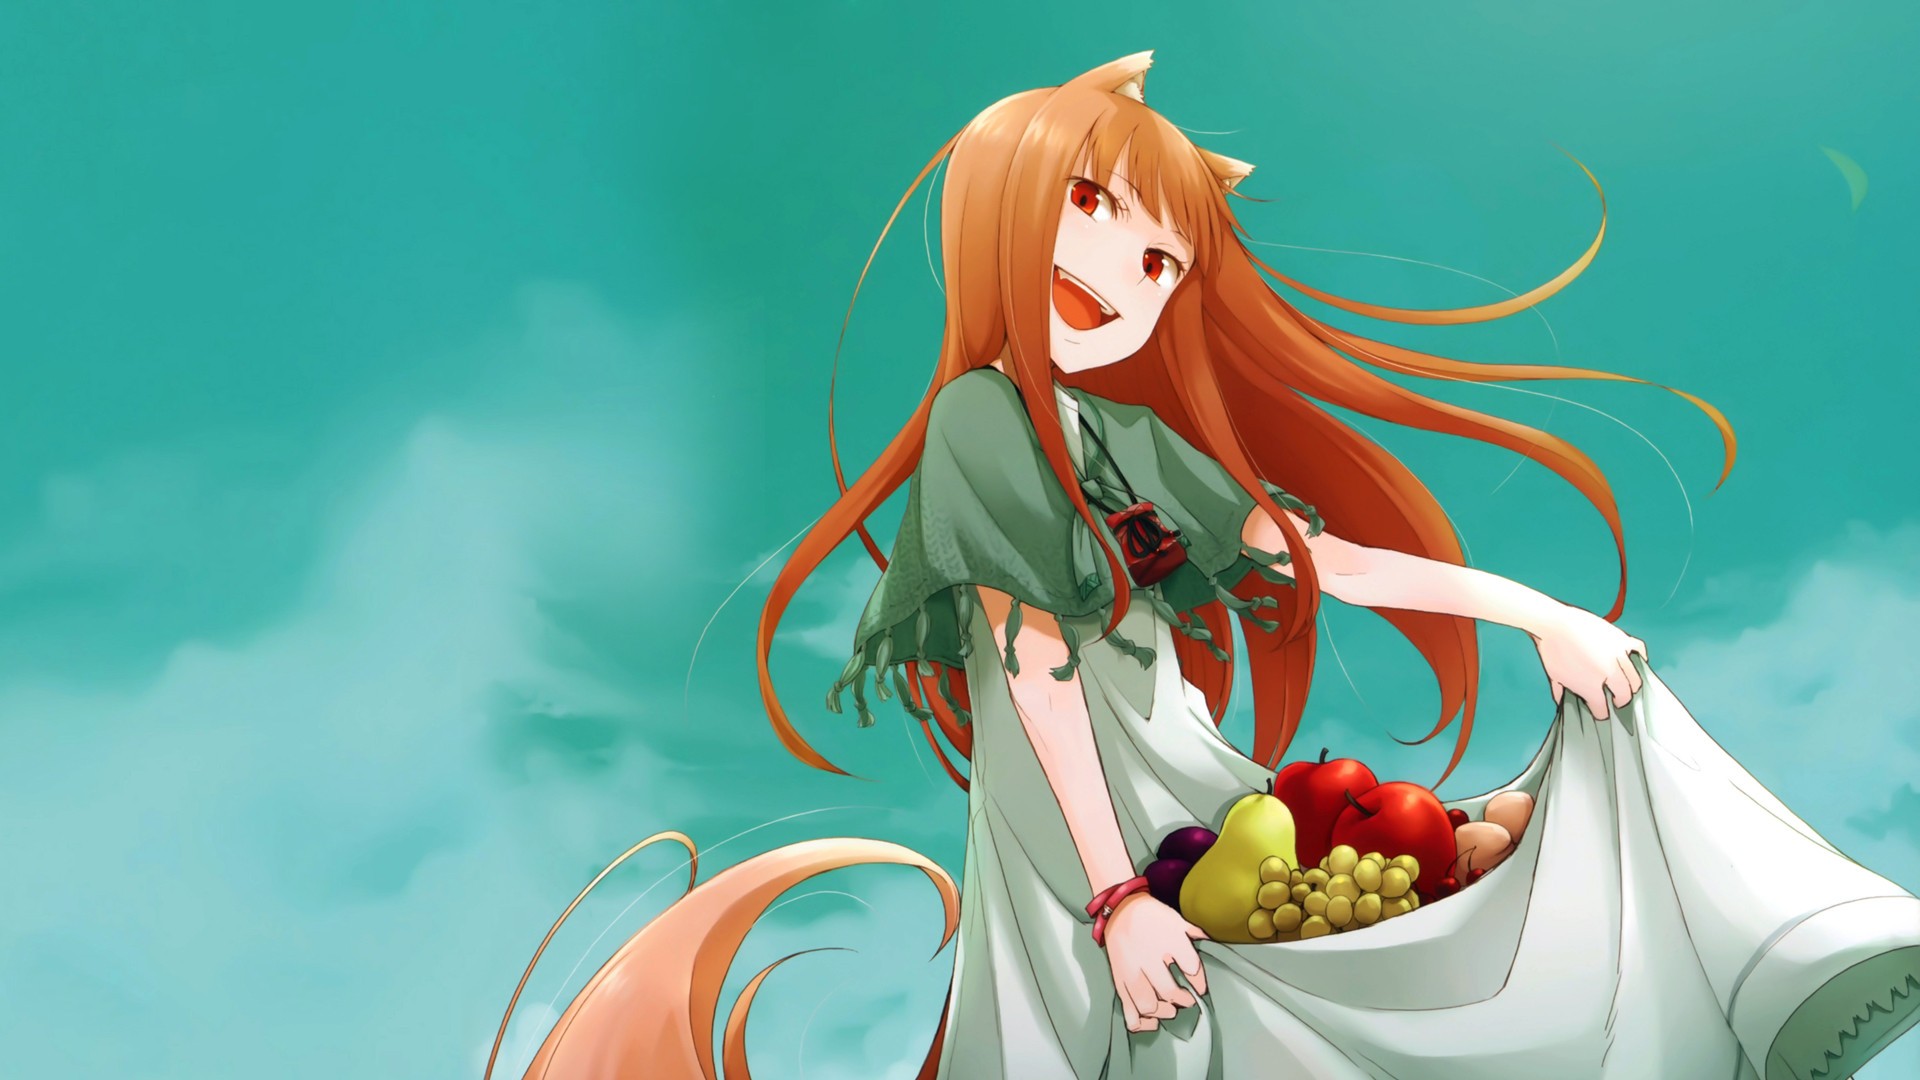 Anime 1920x1080 anime anime girls Spice and Wolf Holo (Spice and Wolf) wolf girls food fruit apples berries cyan background long hair red eyes open mouth